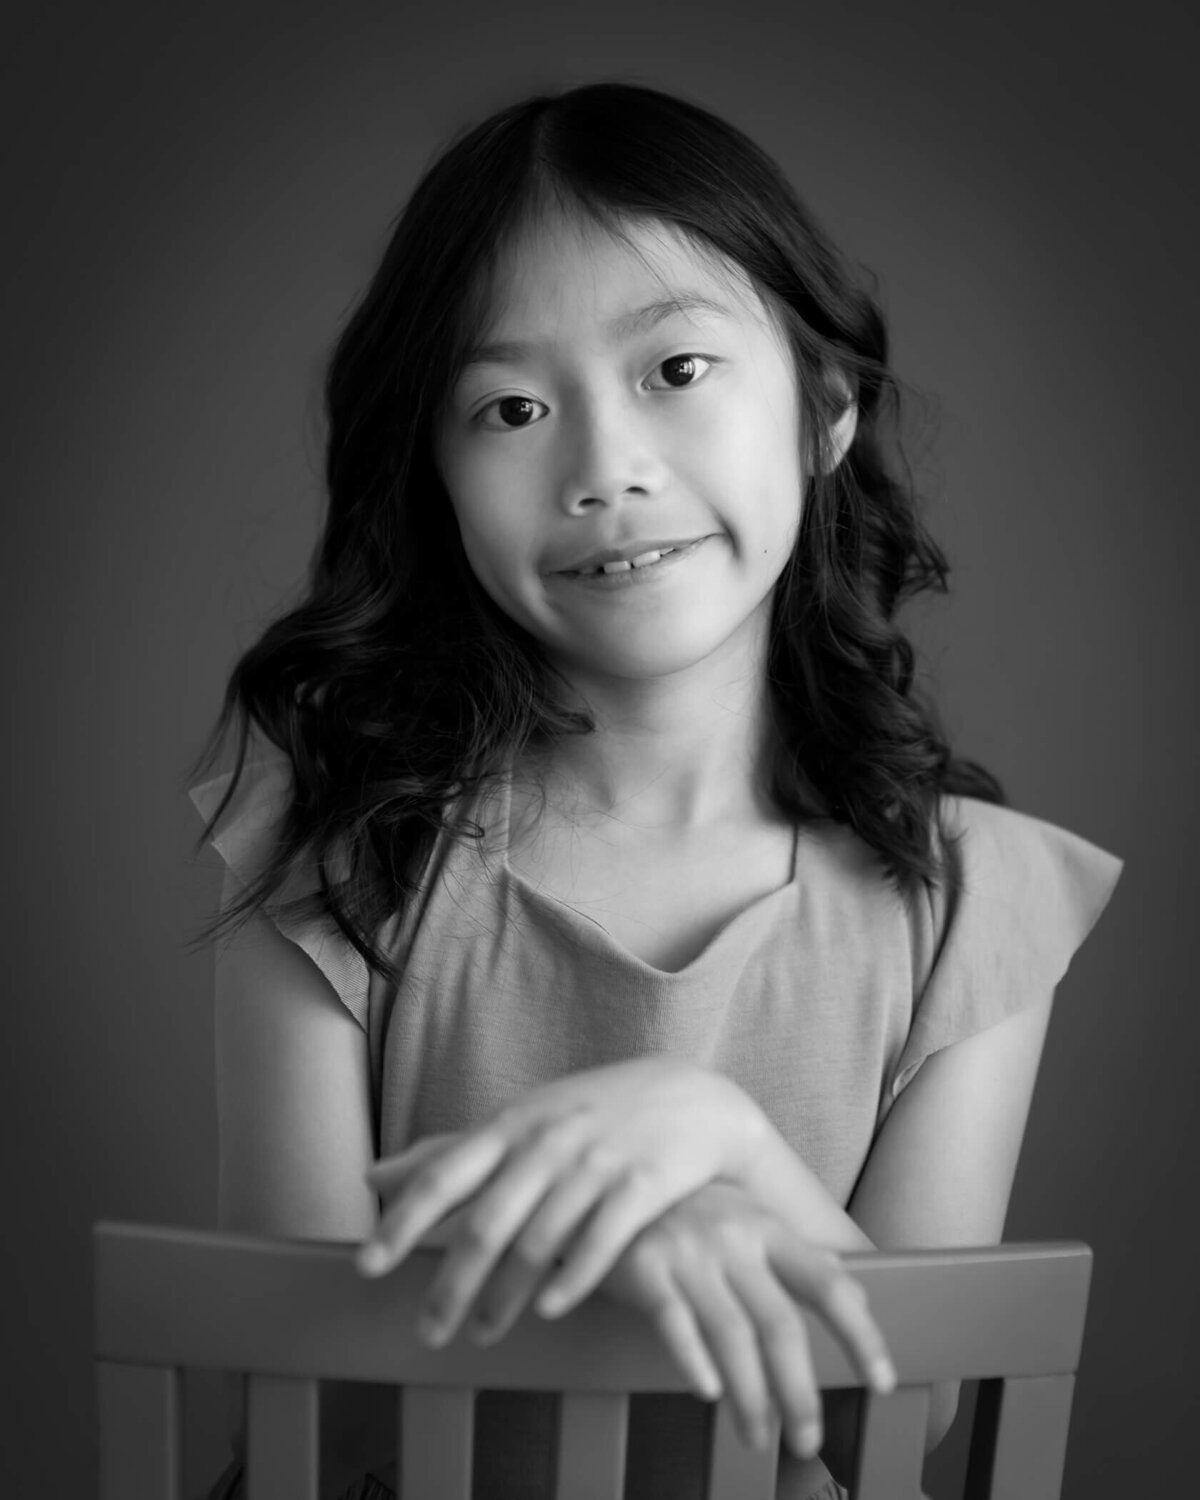 black & white portrait of a 10 year old girl